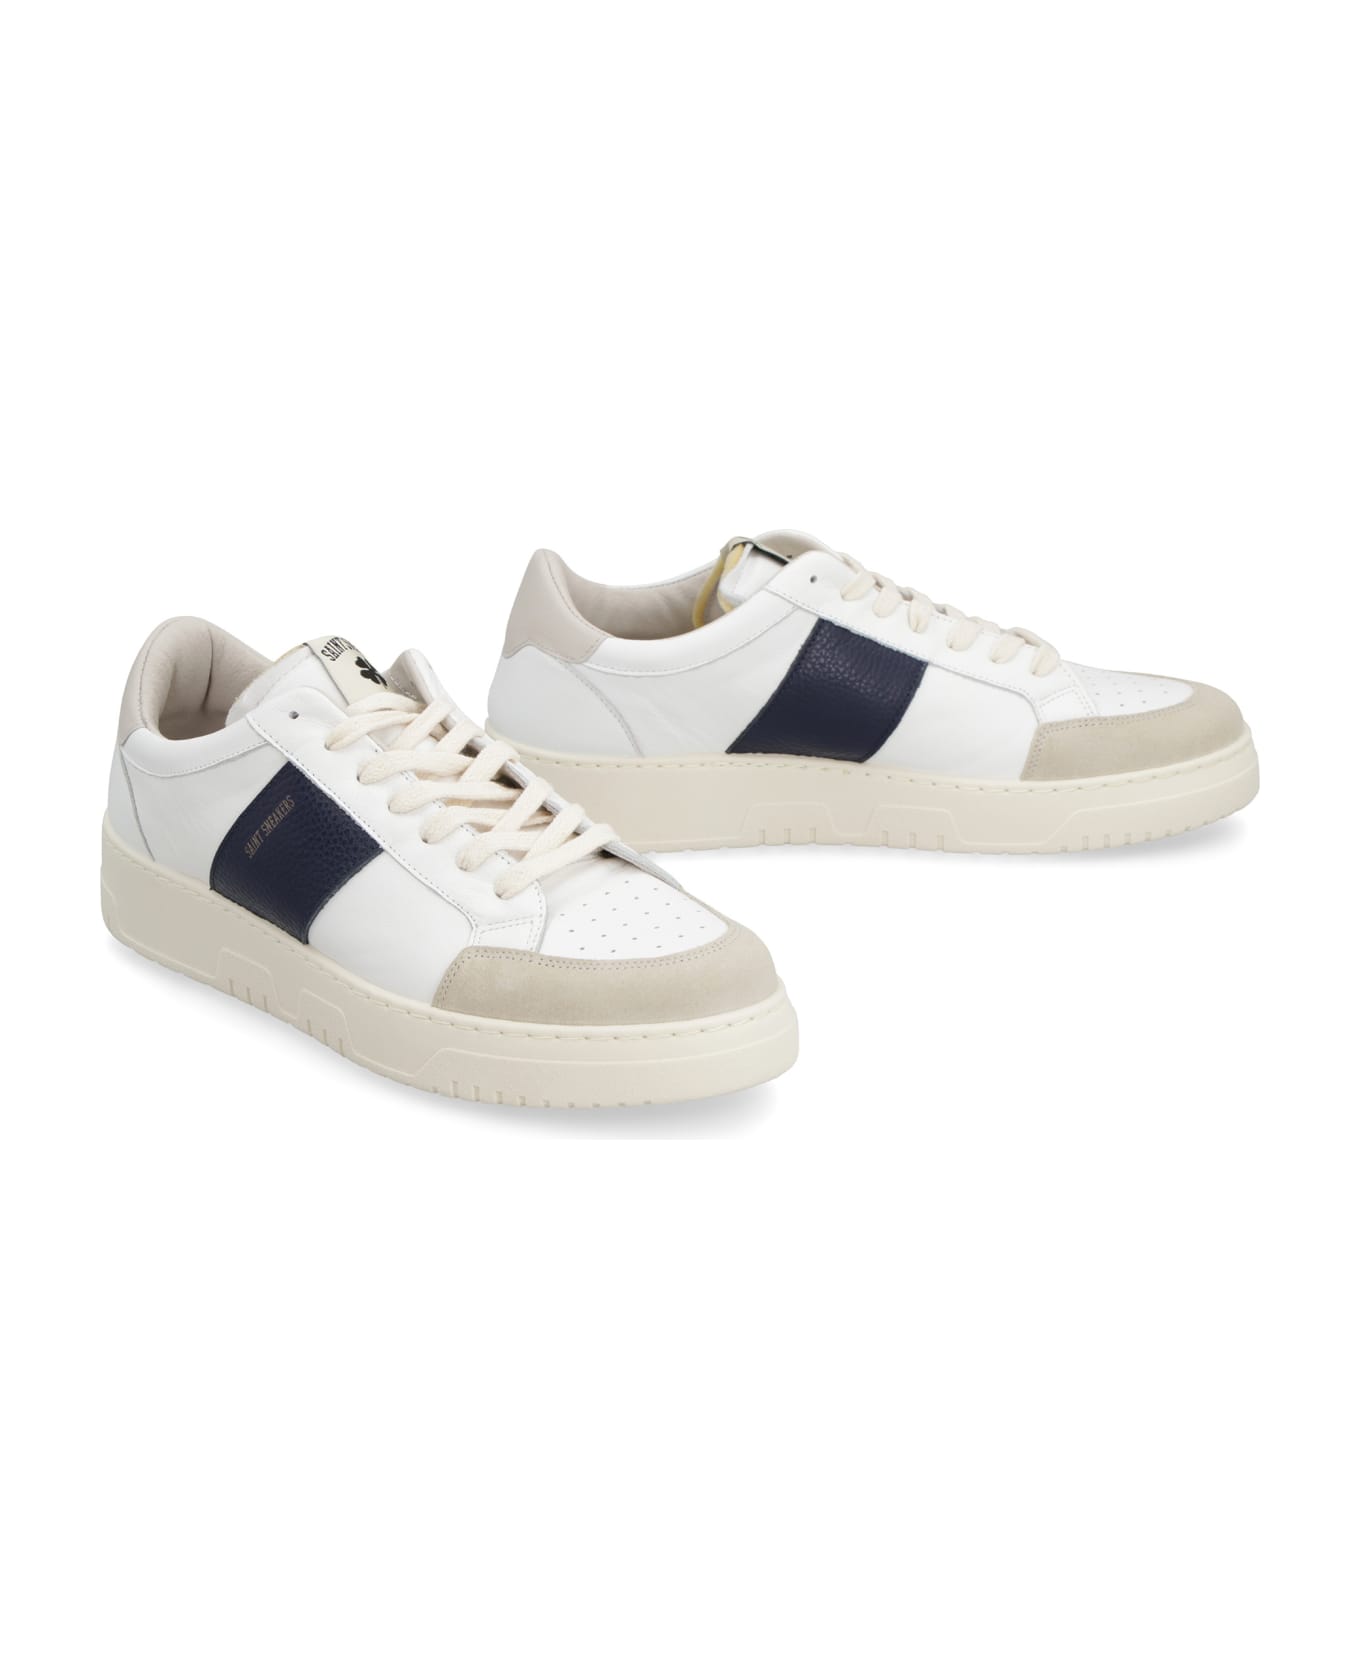 Saint Sneakers Sail Leather Low-top Sneakers - White スニーカー